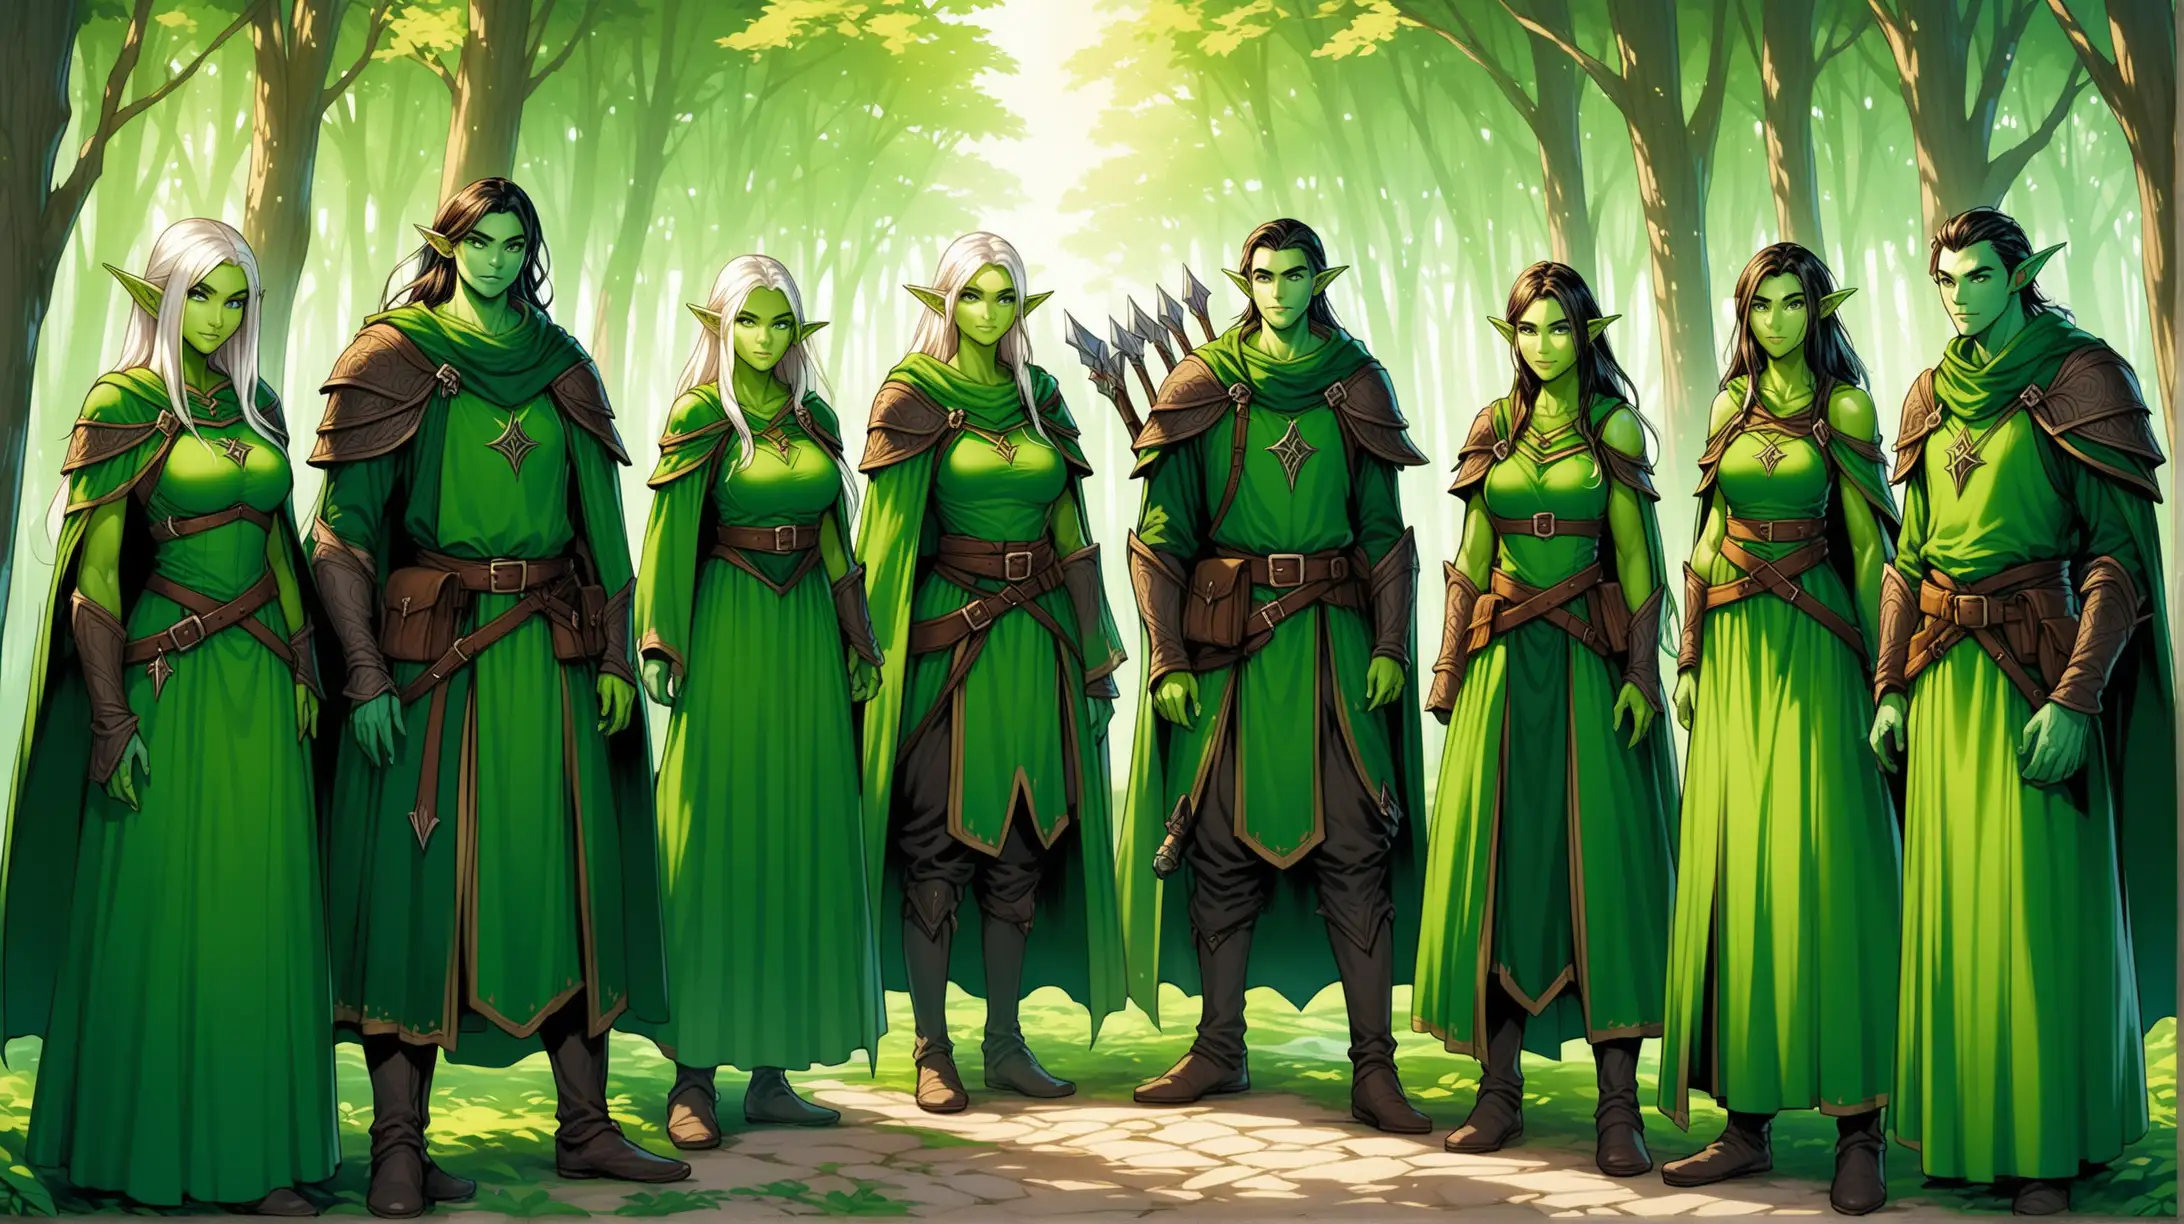 group of rangers and wizards, green elves with green skin, men and women, forest Elf city, Medieval fantasy